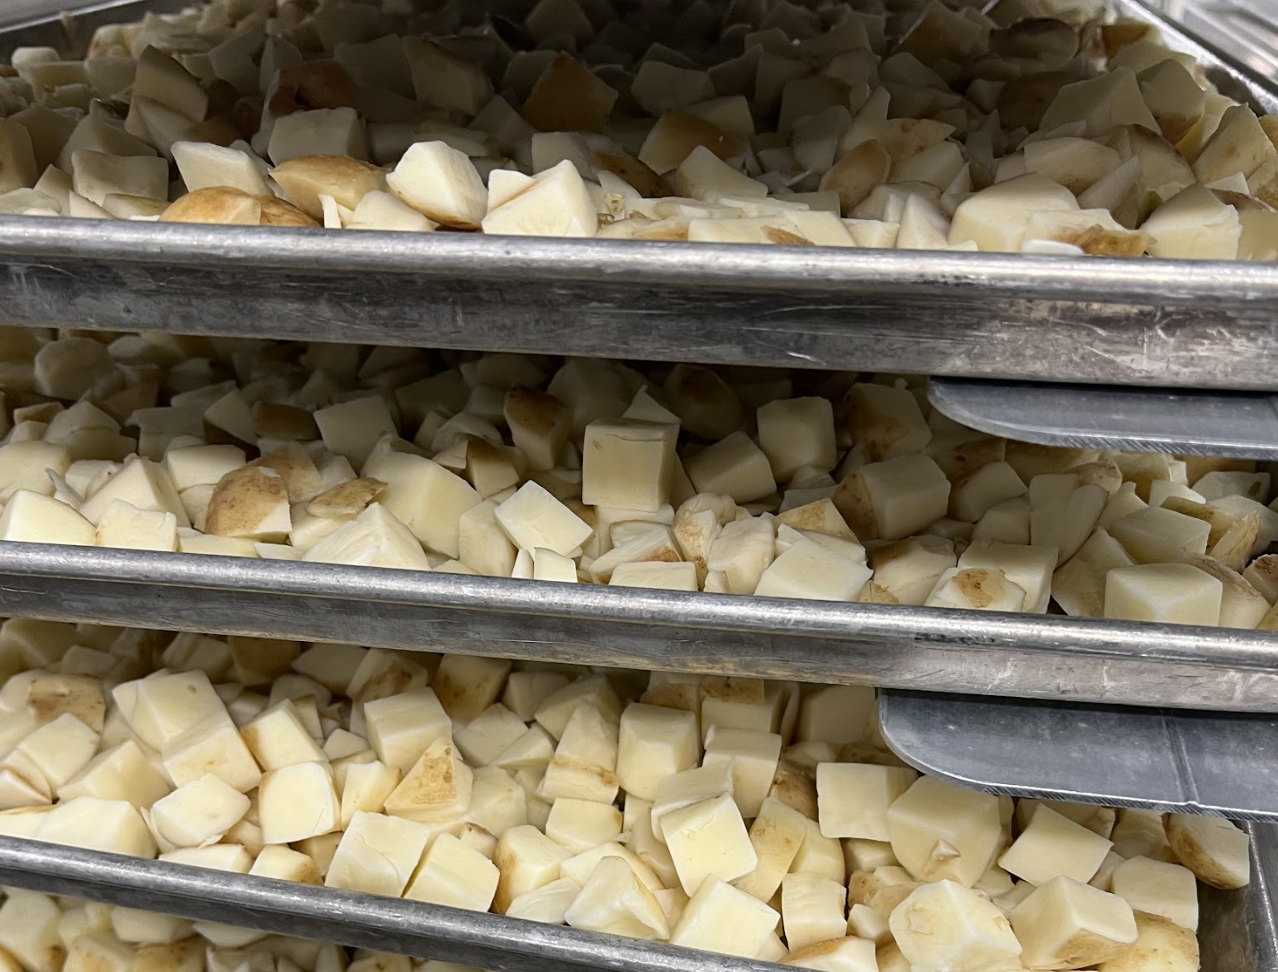 Peeled and chopped potatoes are placed on baking sheets in a speed rack.